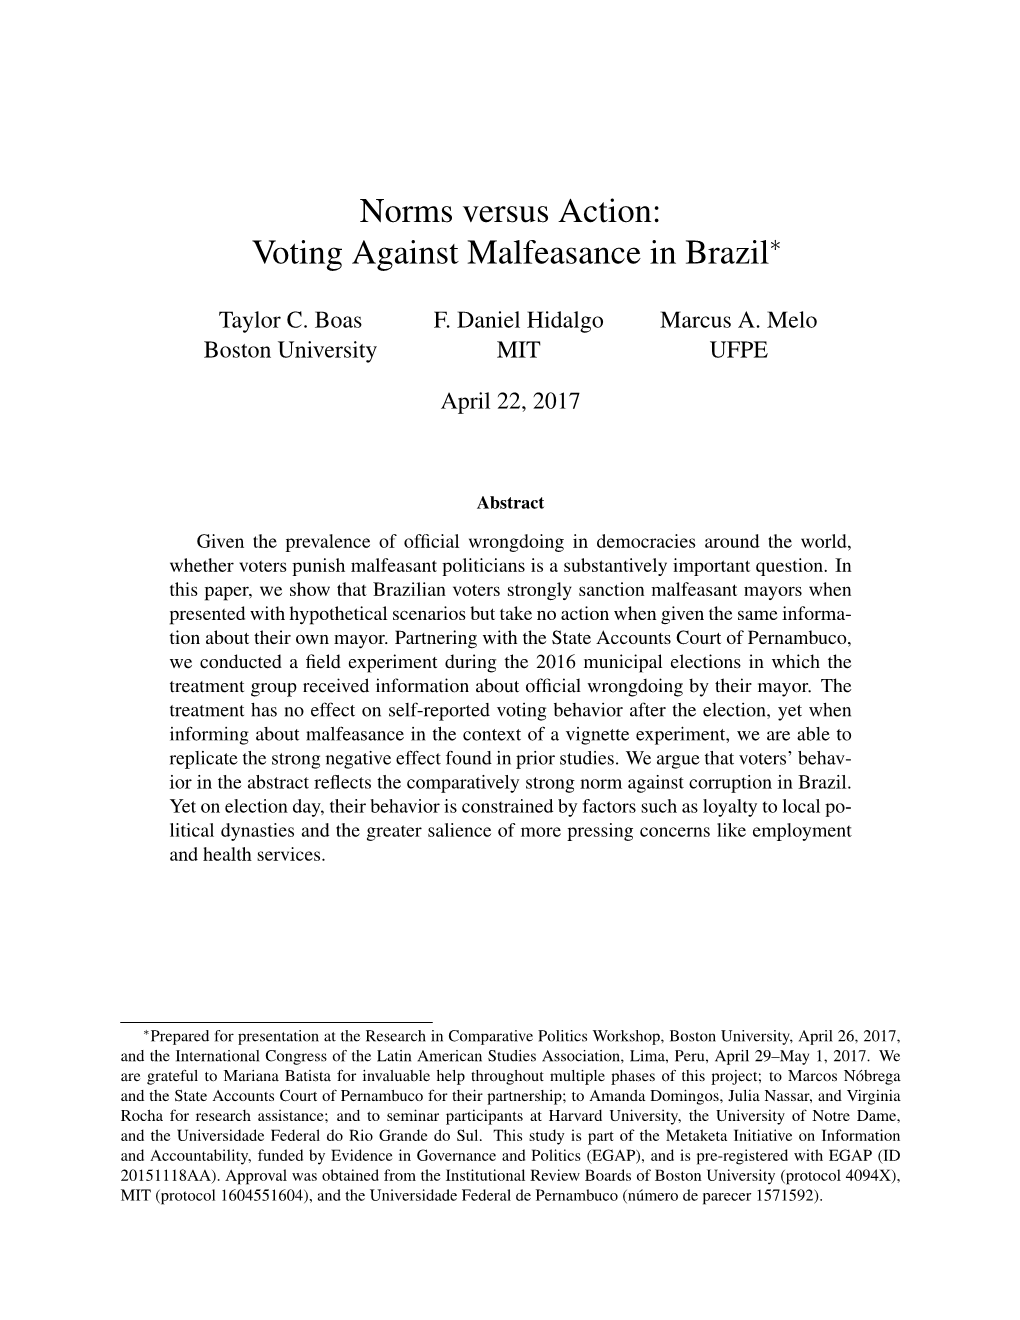 Norms Versus Action: Voting Against Malfeasance in Brazil∗